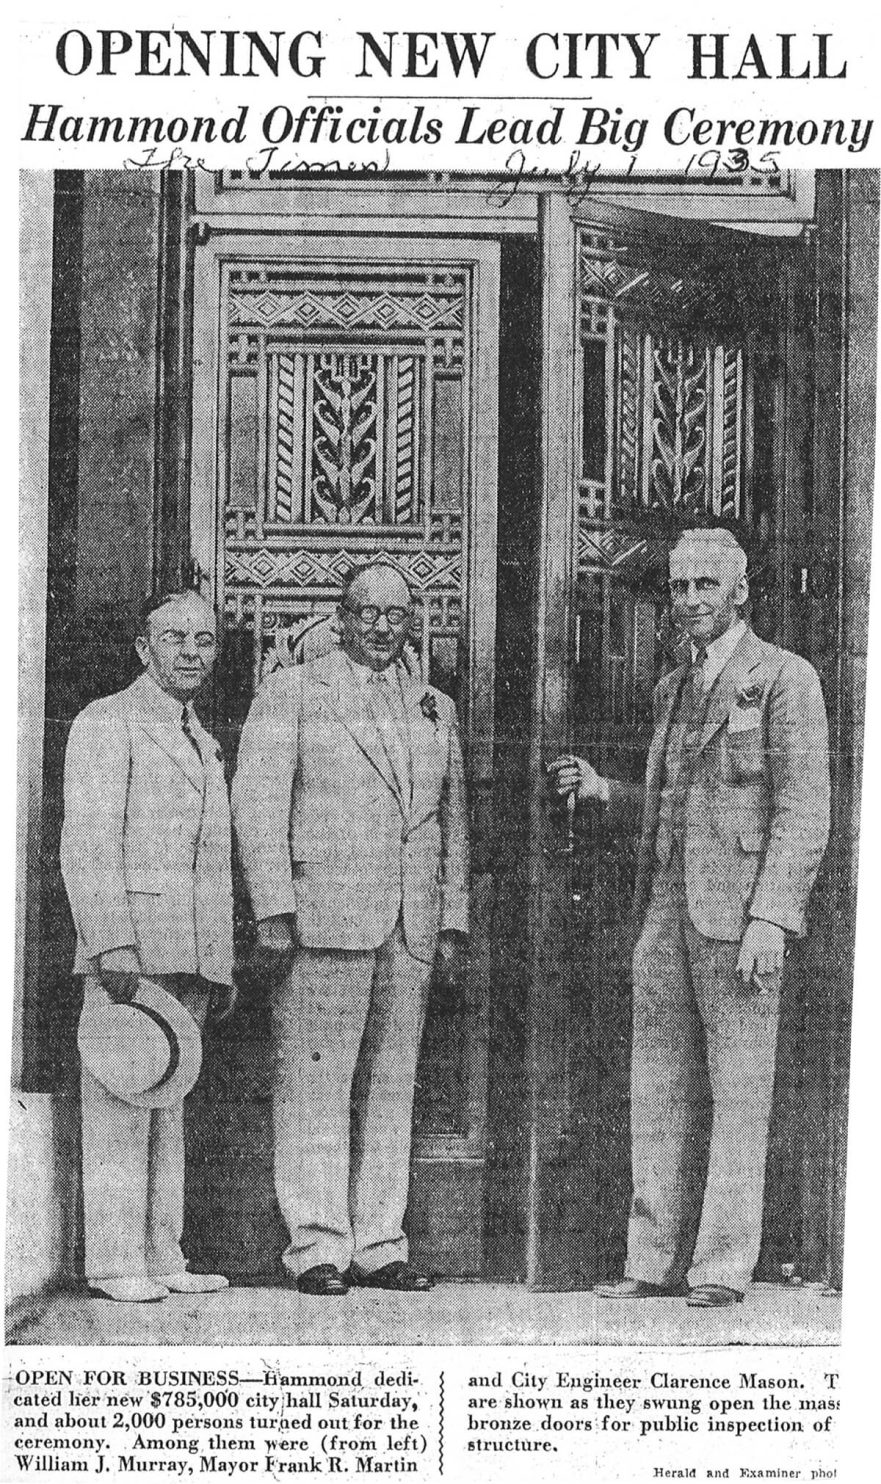 Opening day of new City Hall, William J. Murray, Mayor Frank r. Martin and City Engineer Clarence Mason, July 1, 1935.